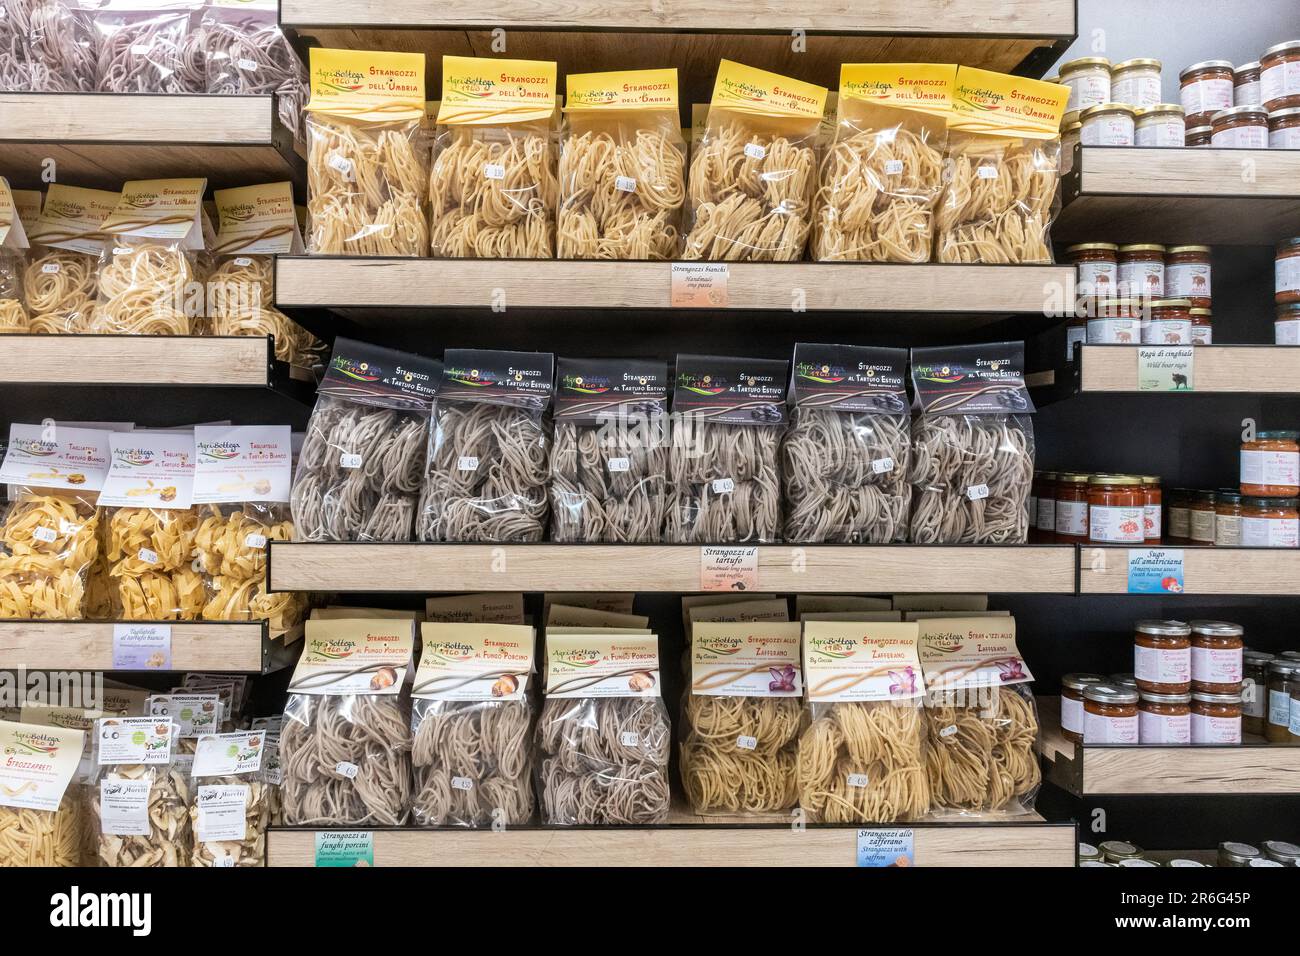 Packets of pasta and jars of sauces on shelves in an Italian farm shop, Castelluccio, Umbria, Italy, Europe Stock Photo